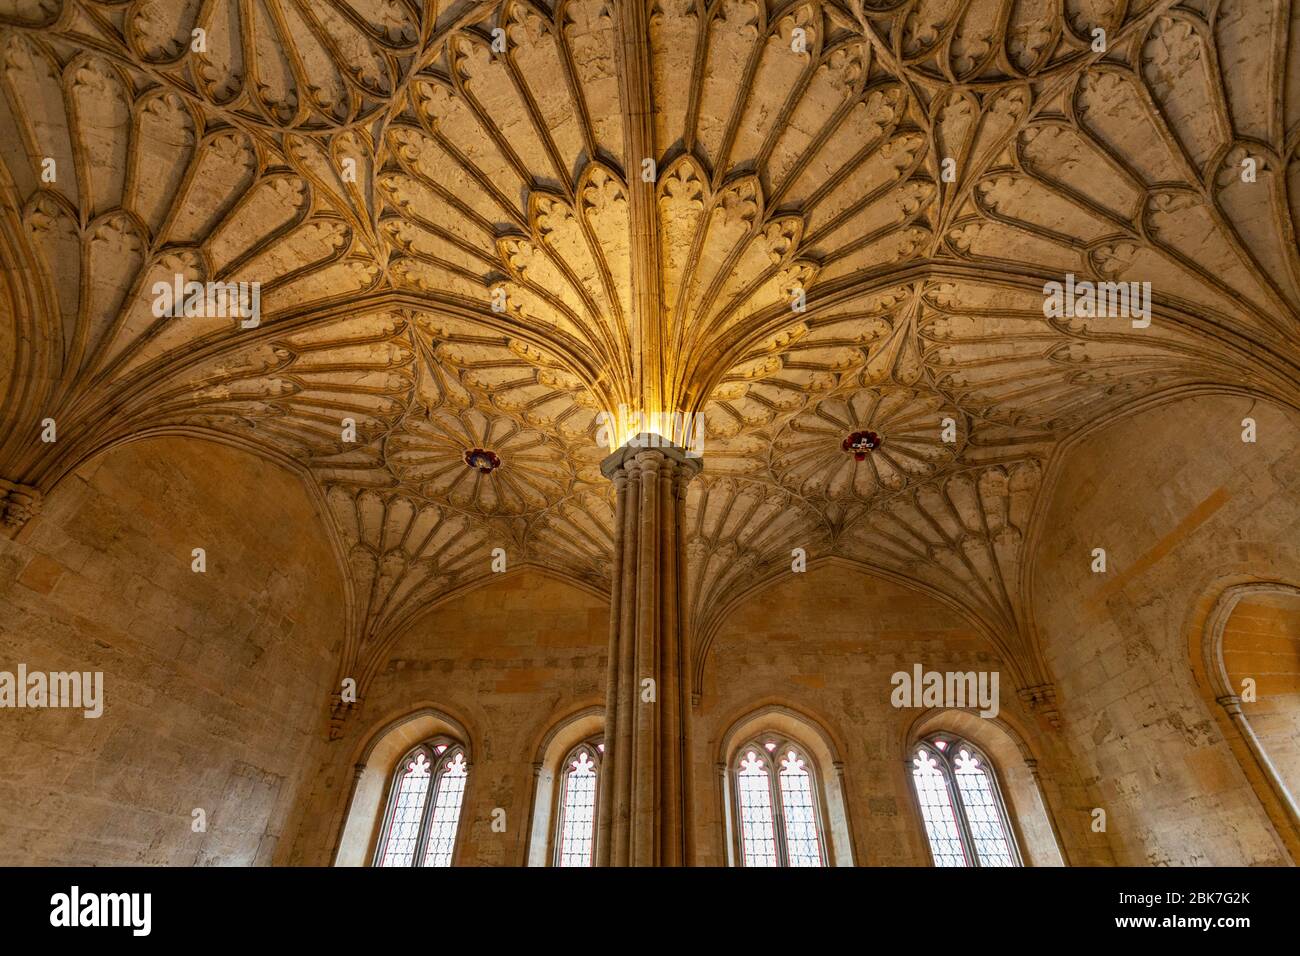 The decorated vaulted ceiling, columns and arched windows in Christ Church college at Oxford University, England Stock Photo